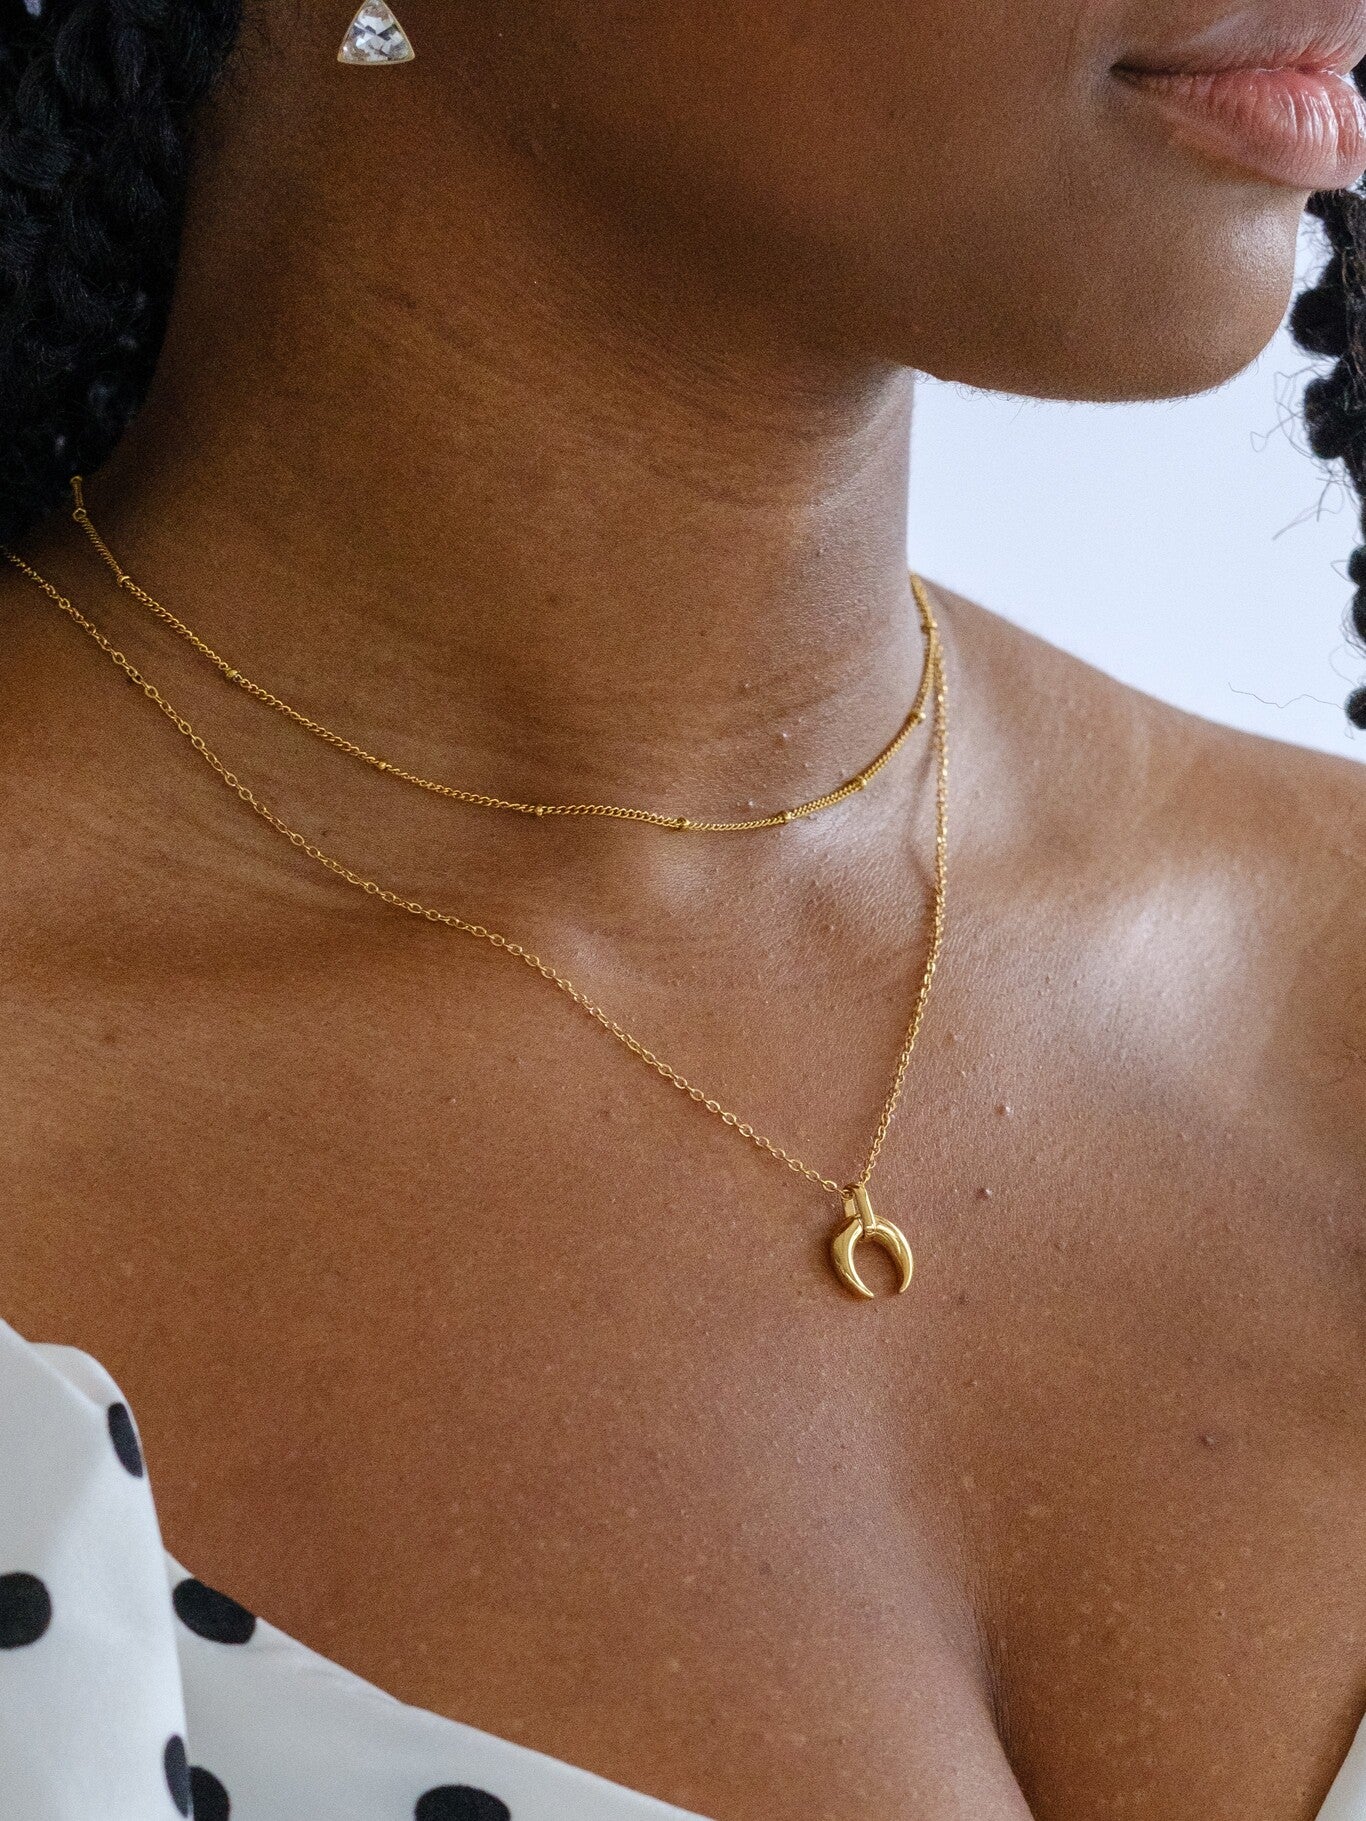 A woman wears a gold satellite chain and a loner necklace with a crescent moon pendant